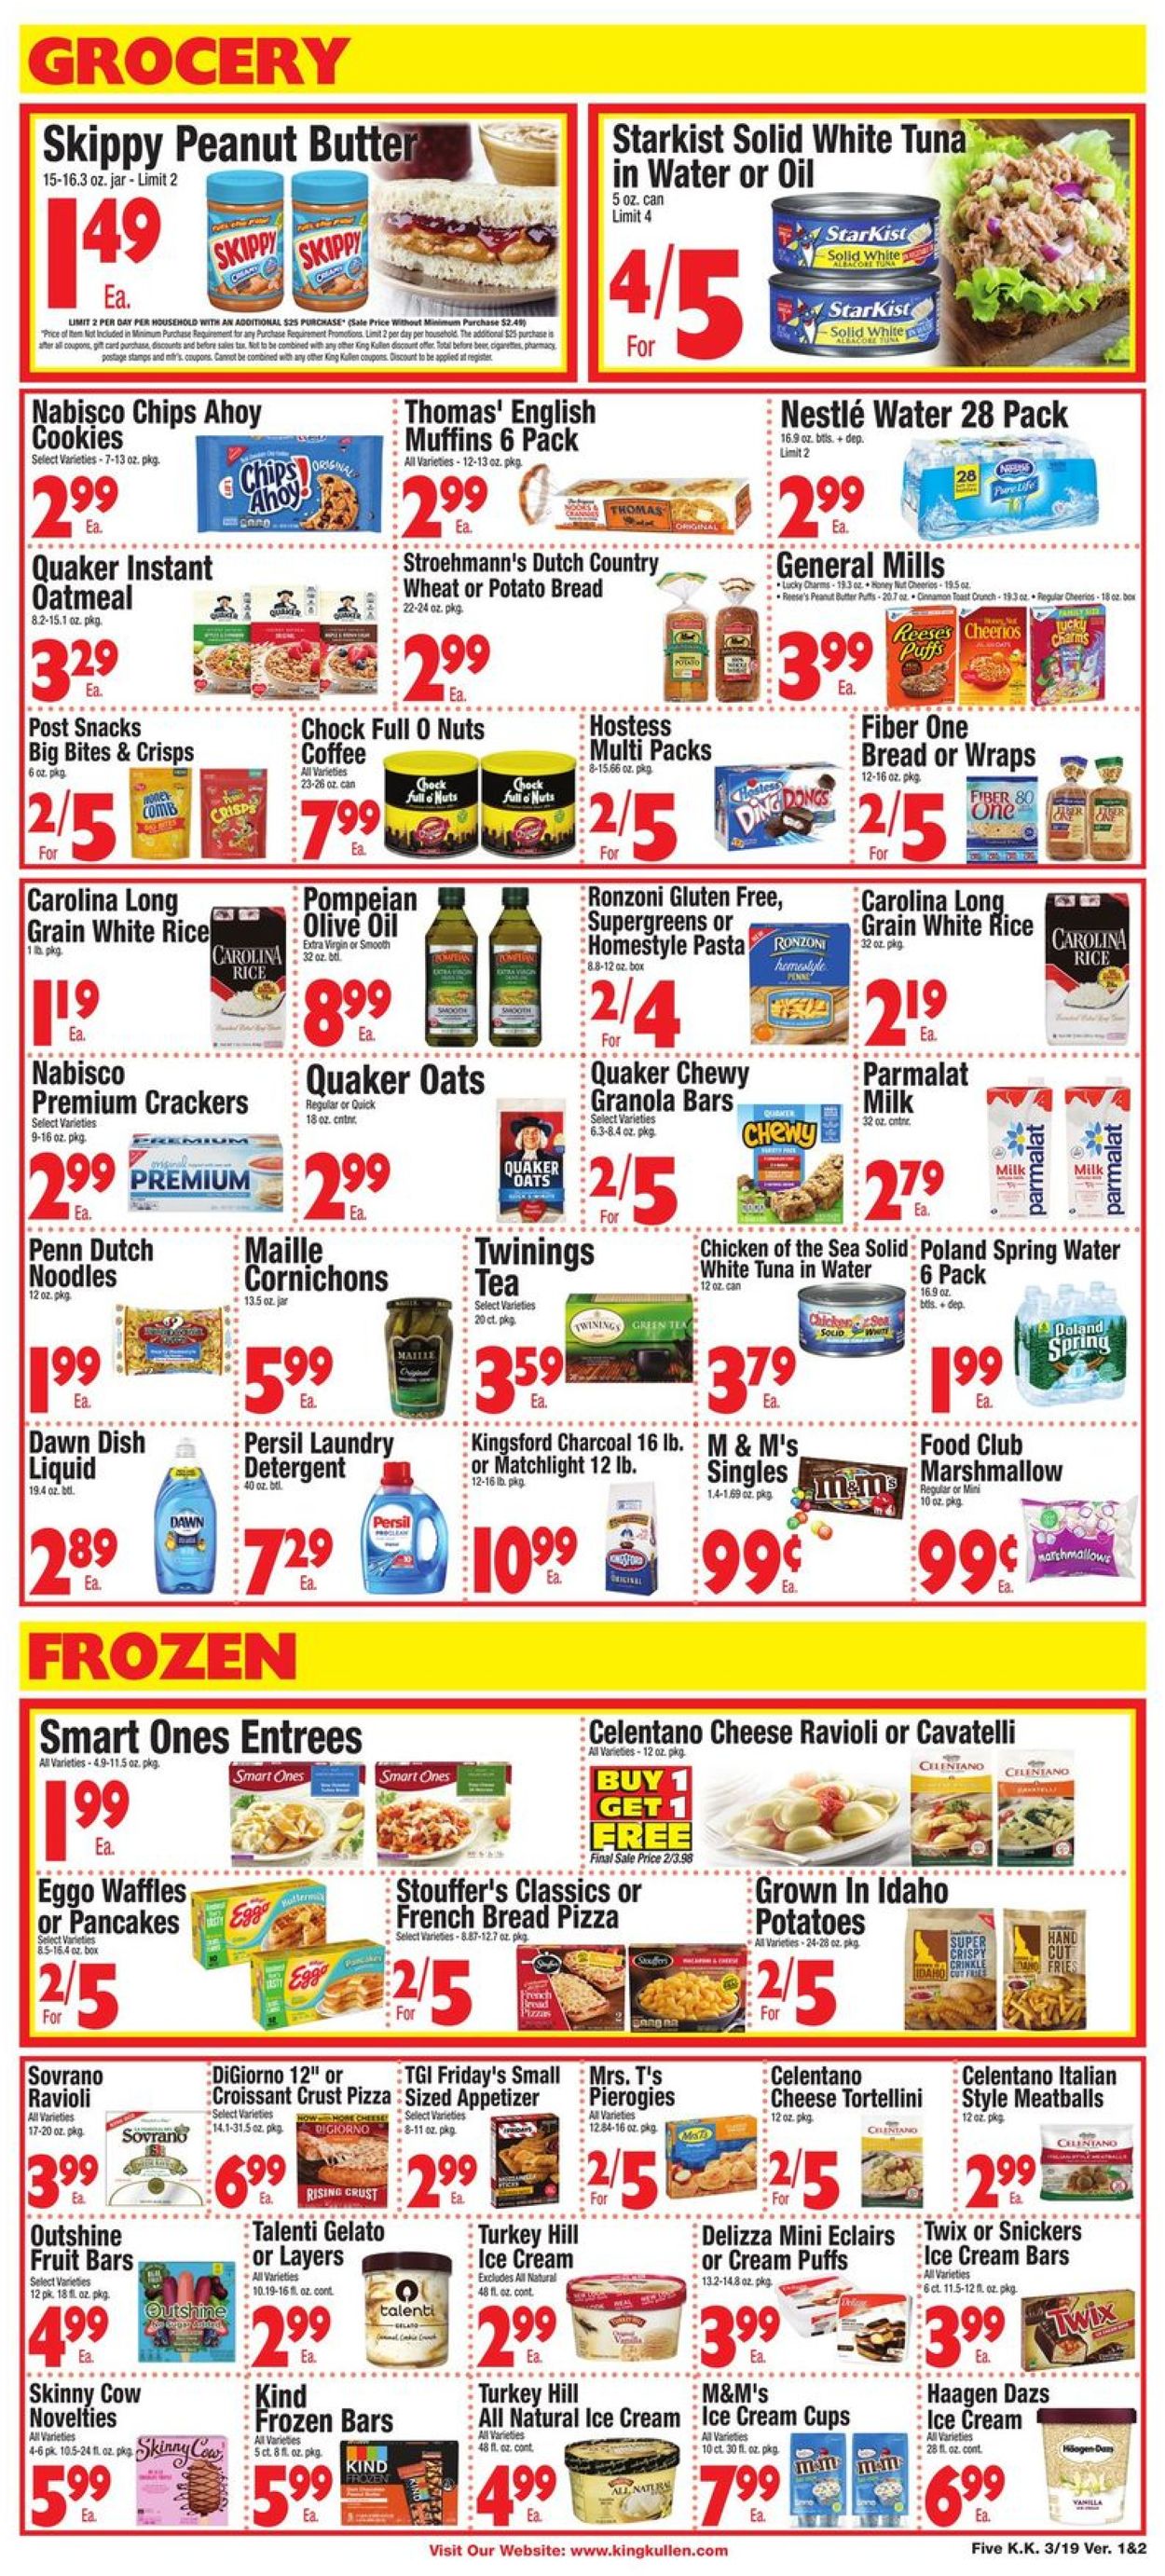 King Kullen Ad from 03/19/2021